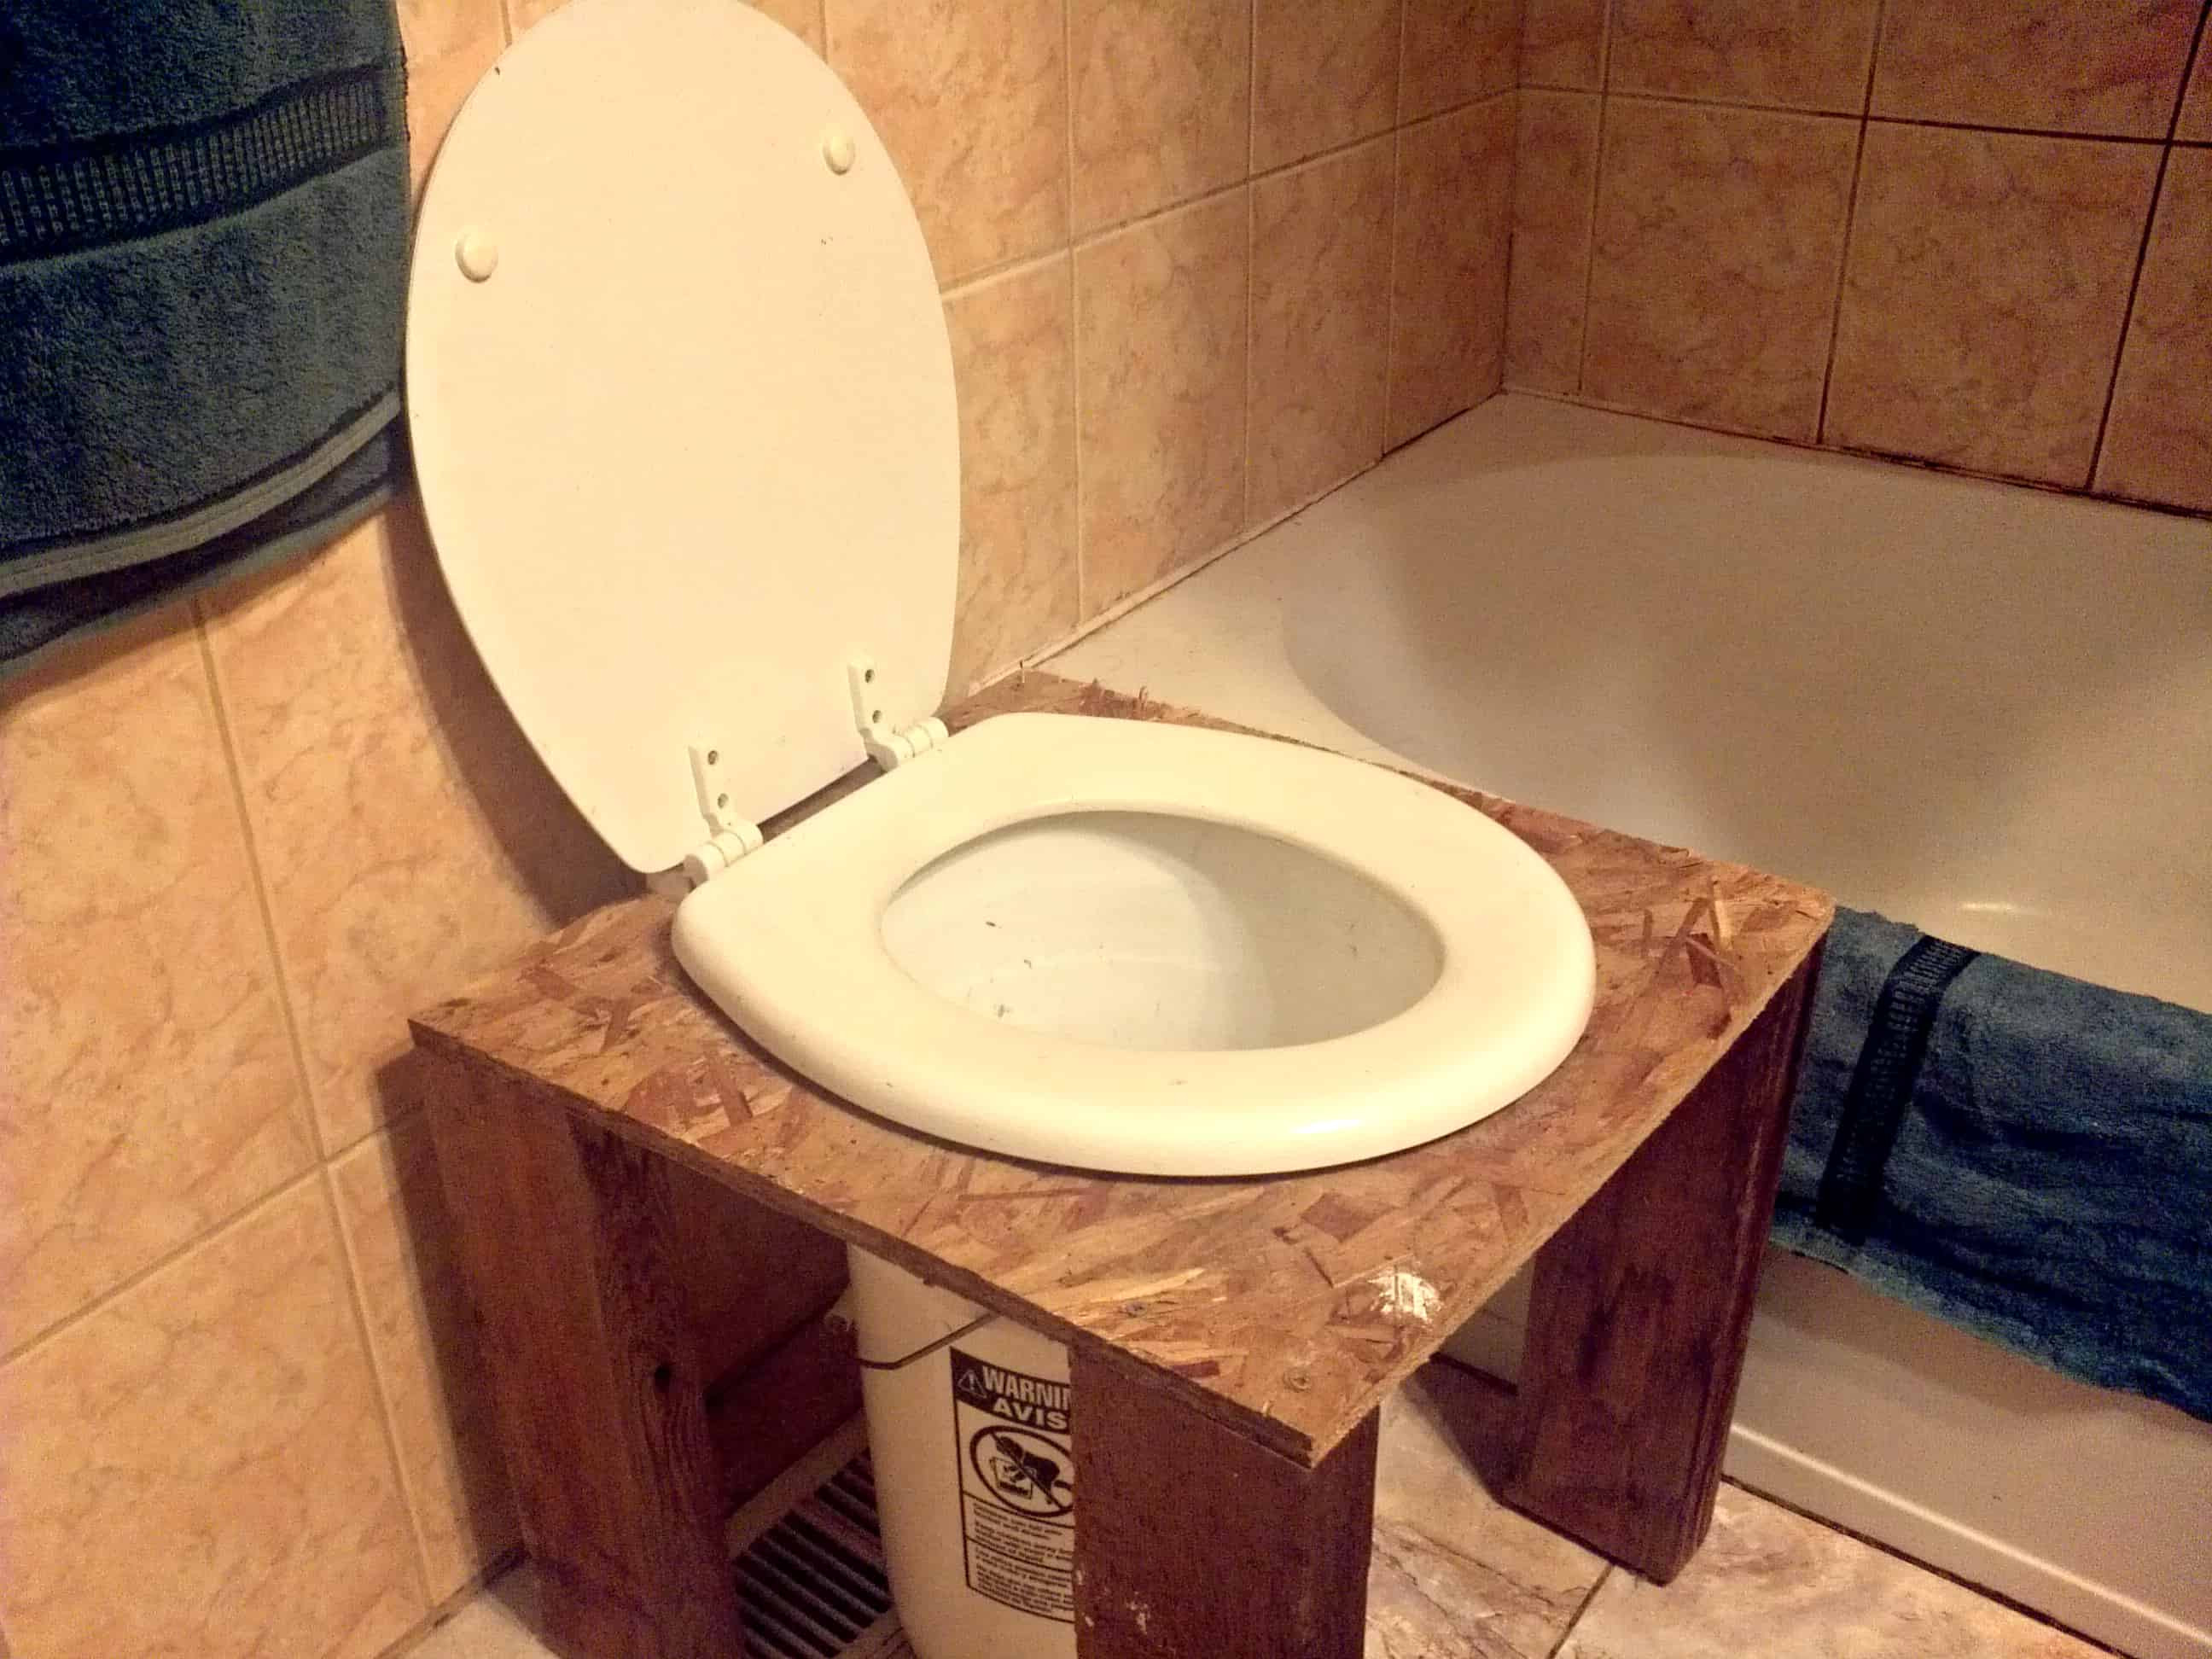 DIY Composting Toilet Plans
 How To Make Your Own DIY posting Toilet Farming My